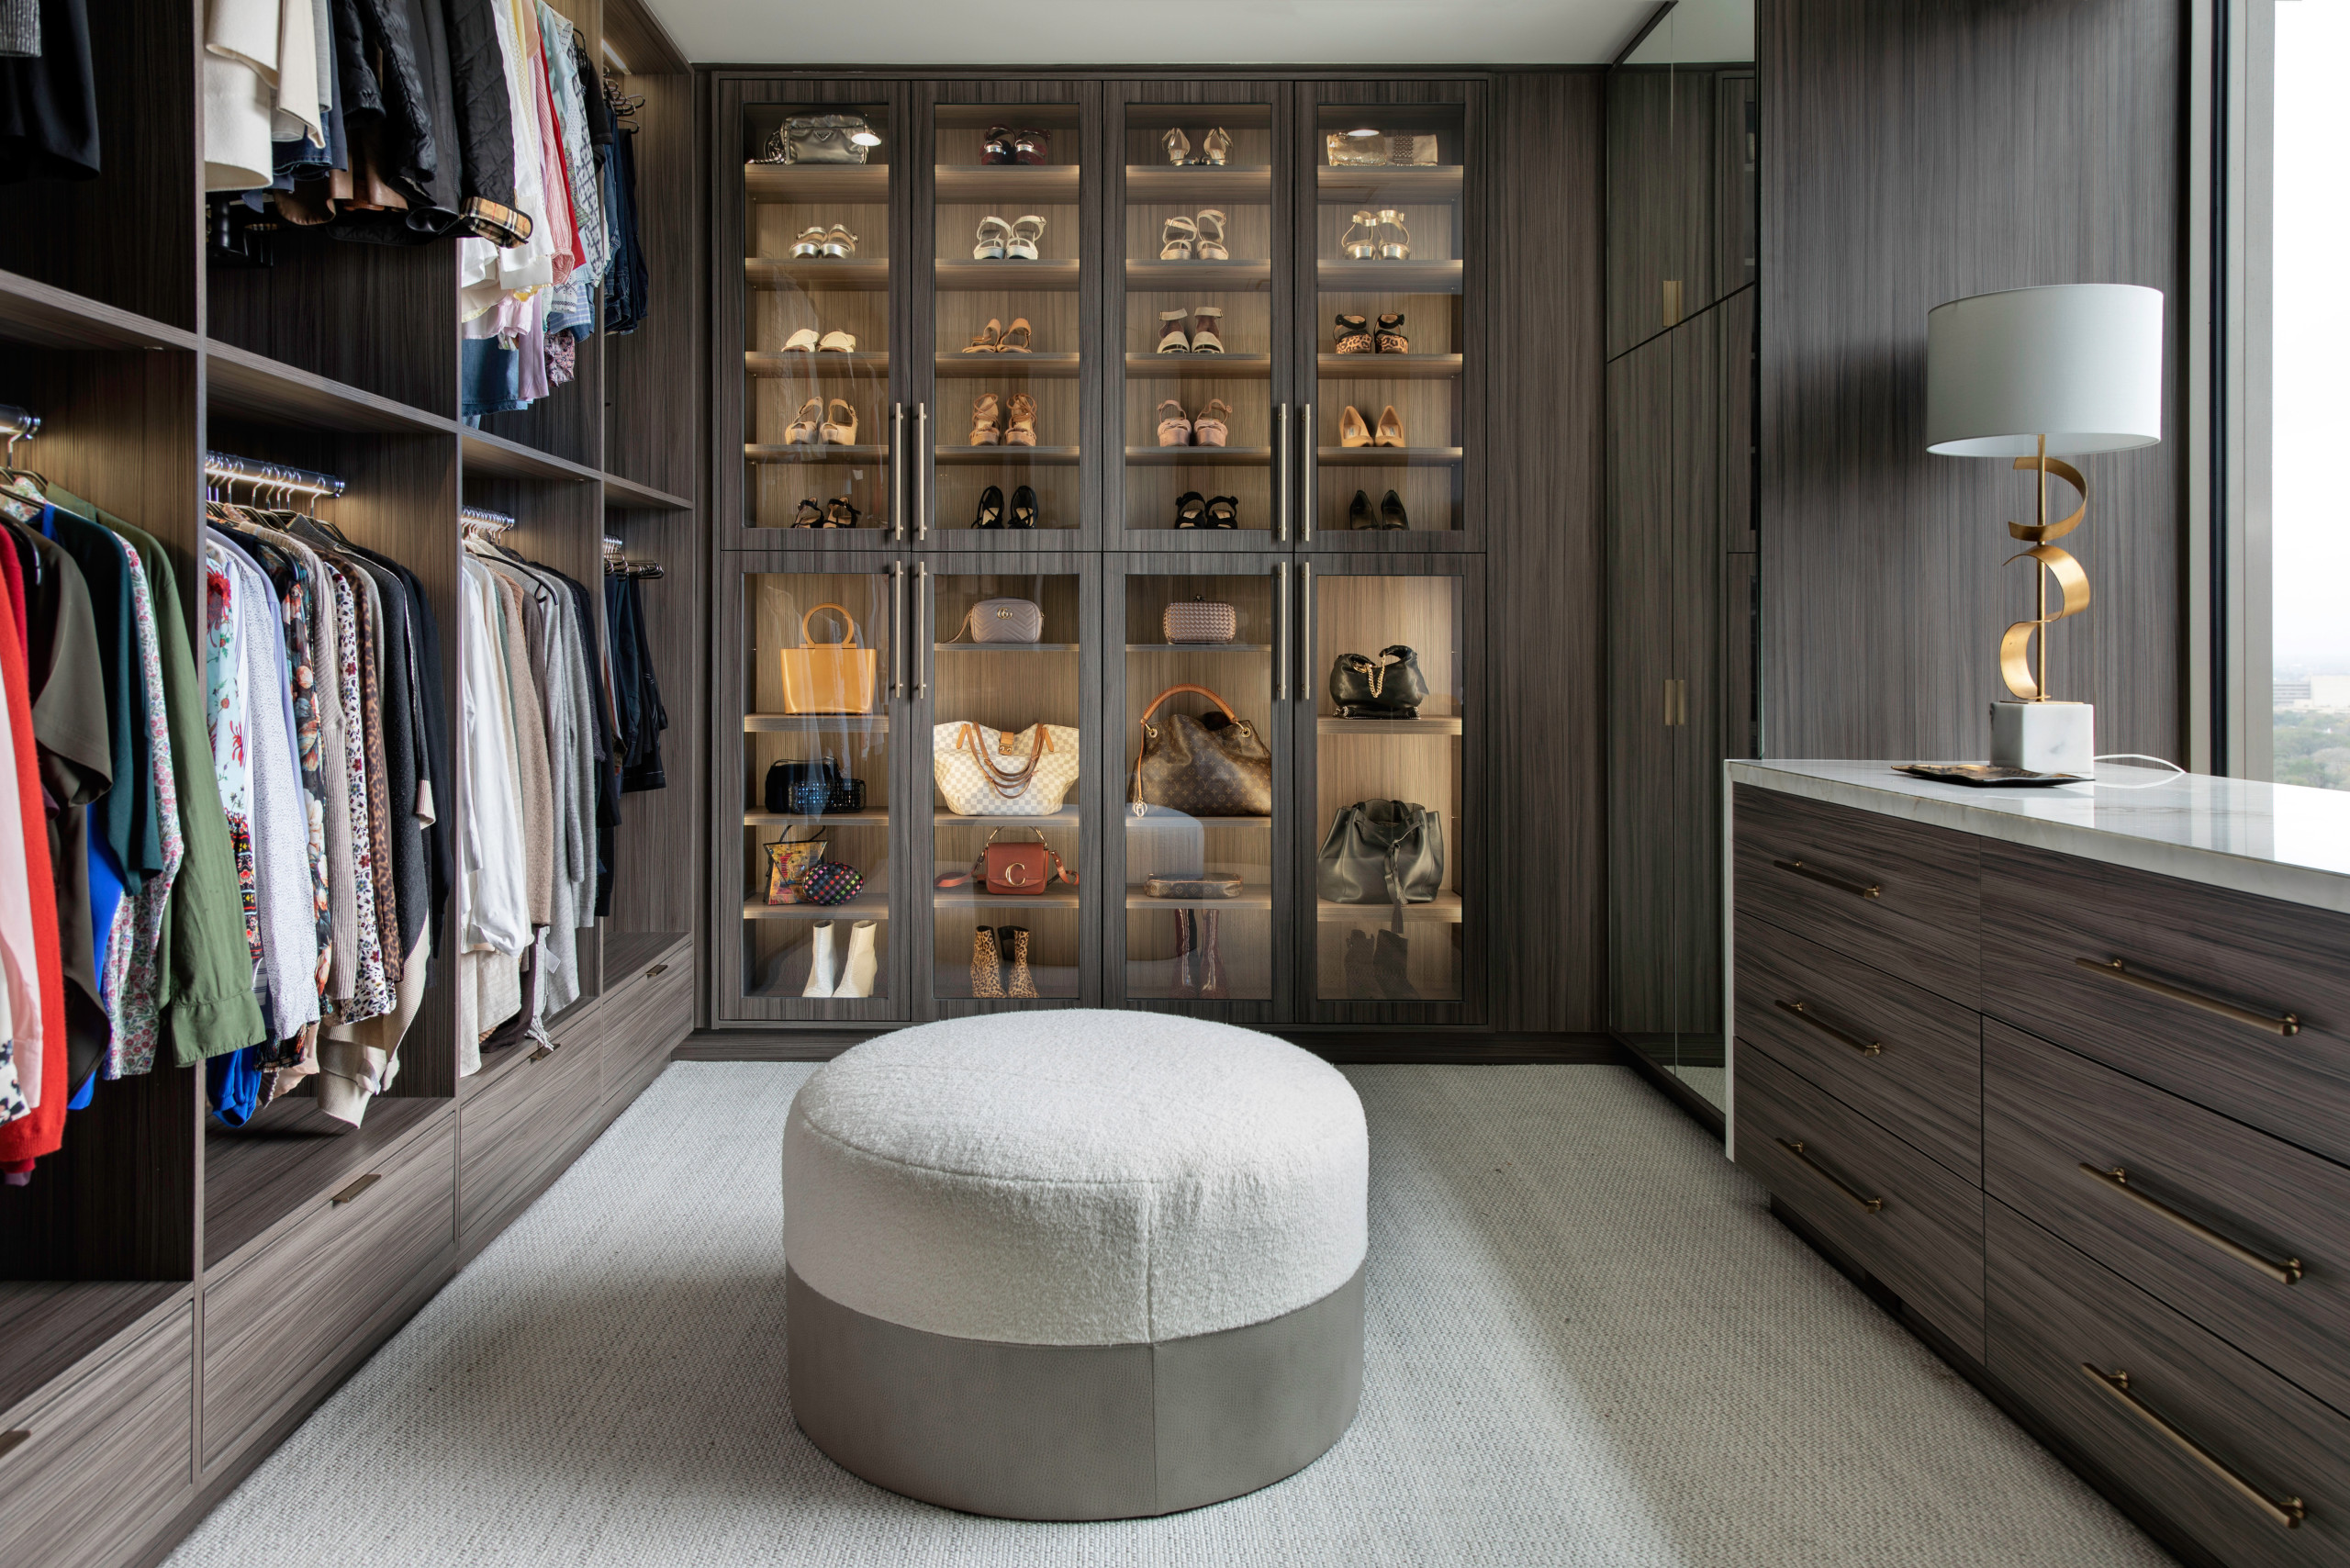 15 contemporary walk-in closet designs that maximize space and style